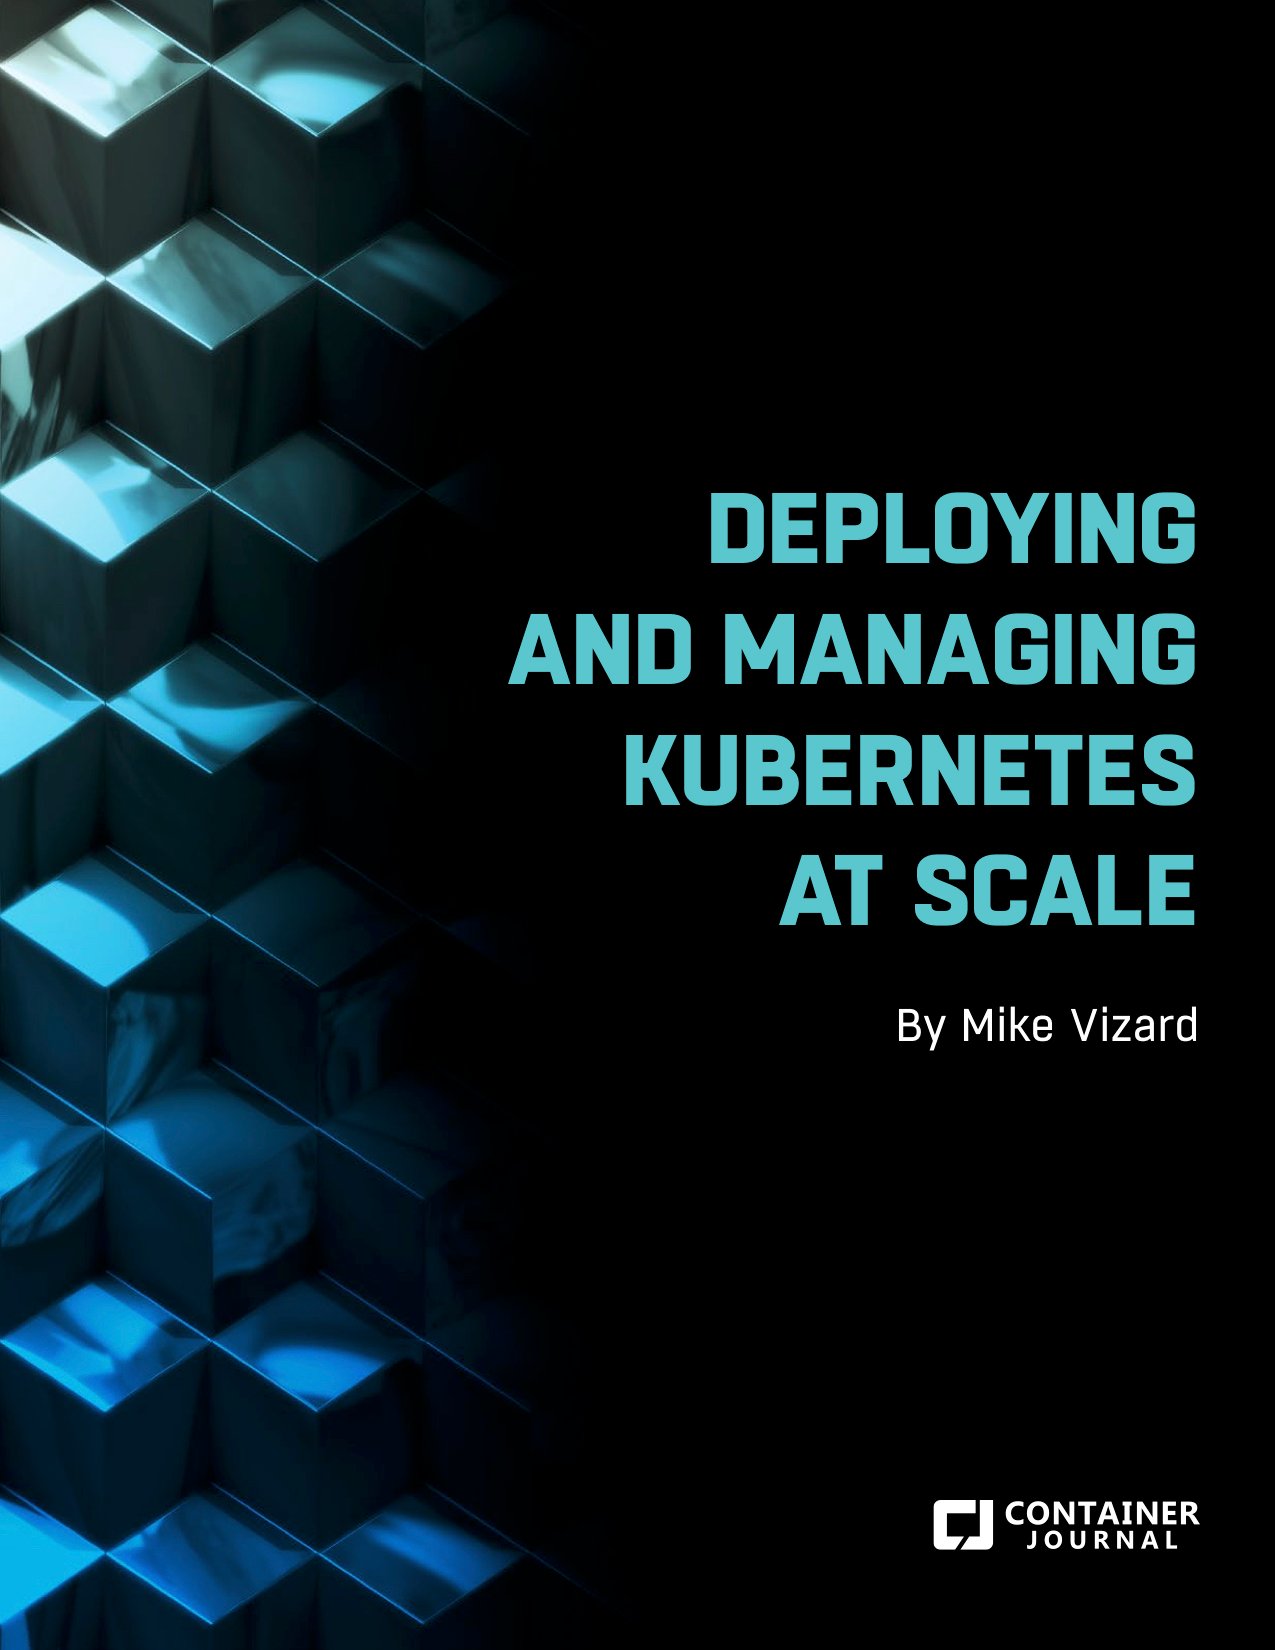 Deploying and Managing Kubernetes at Scale